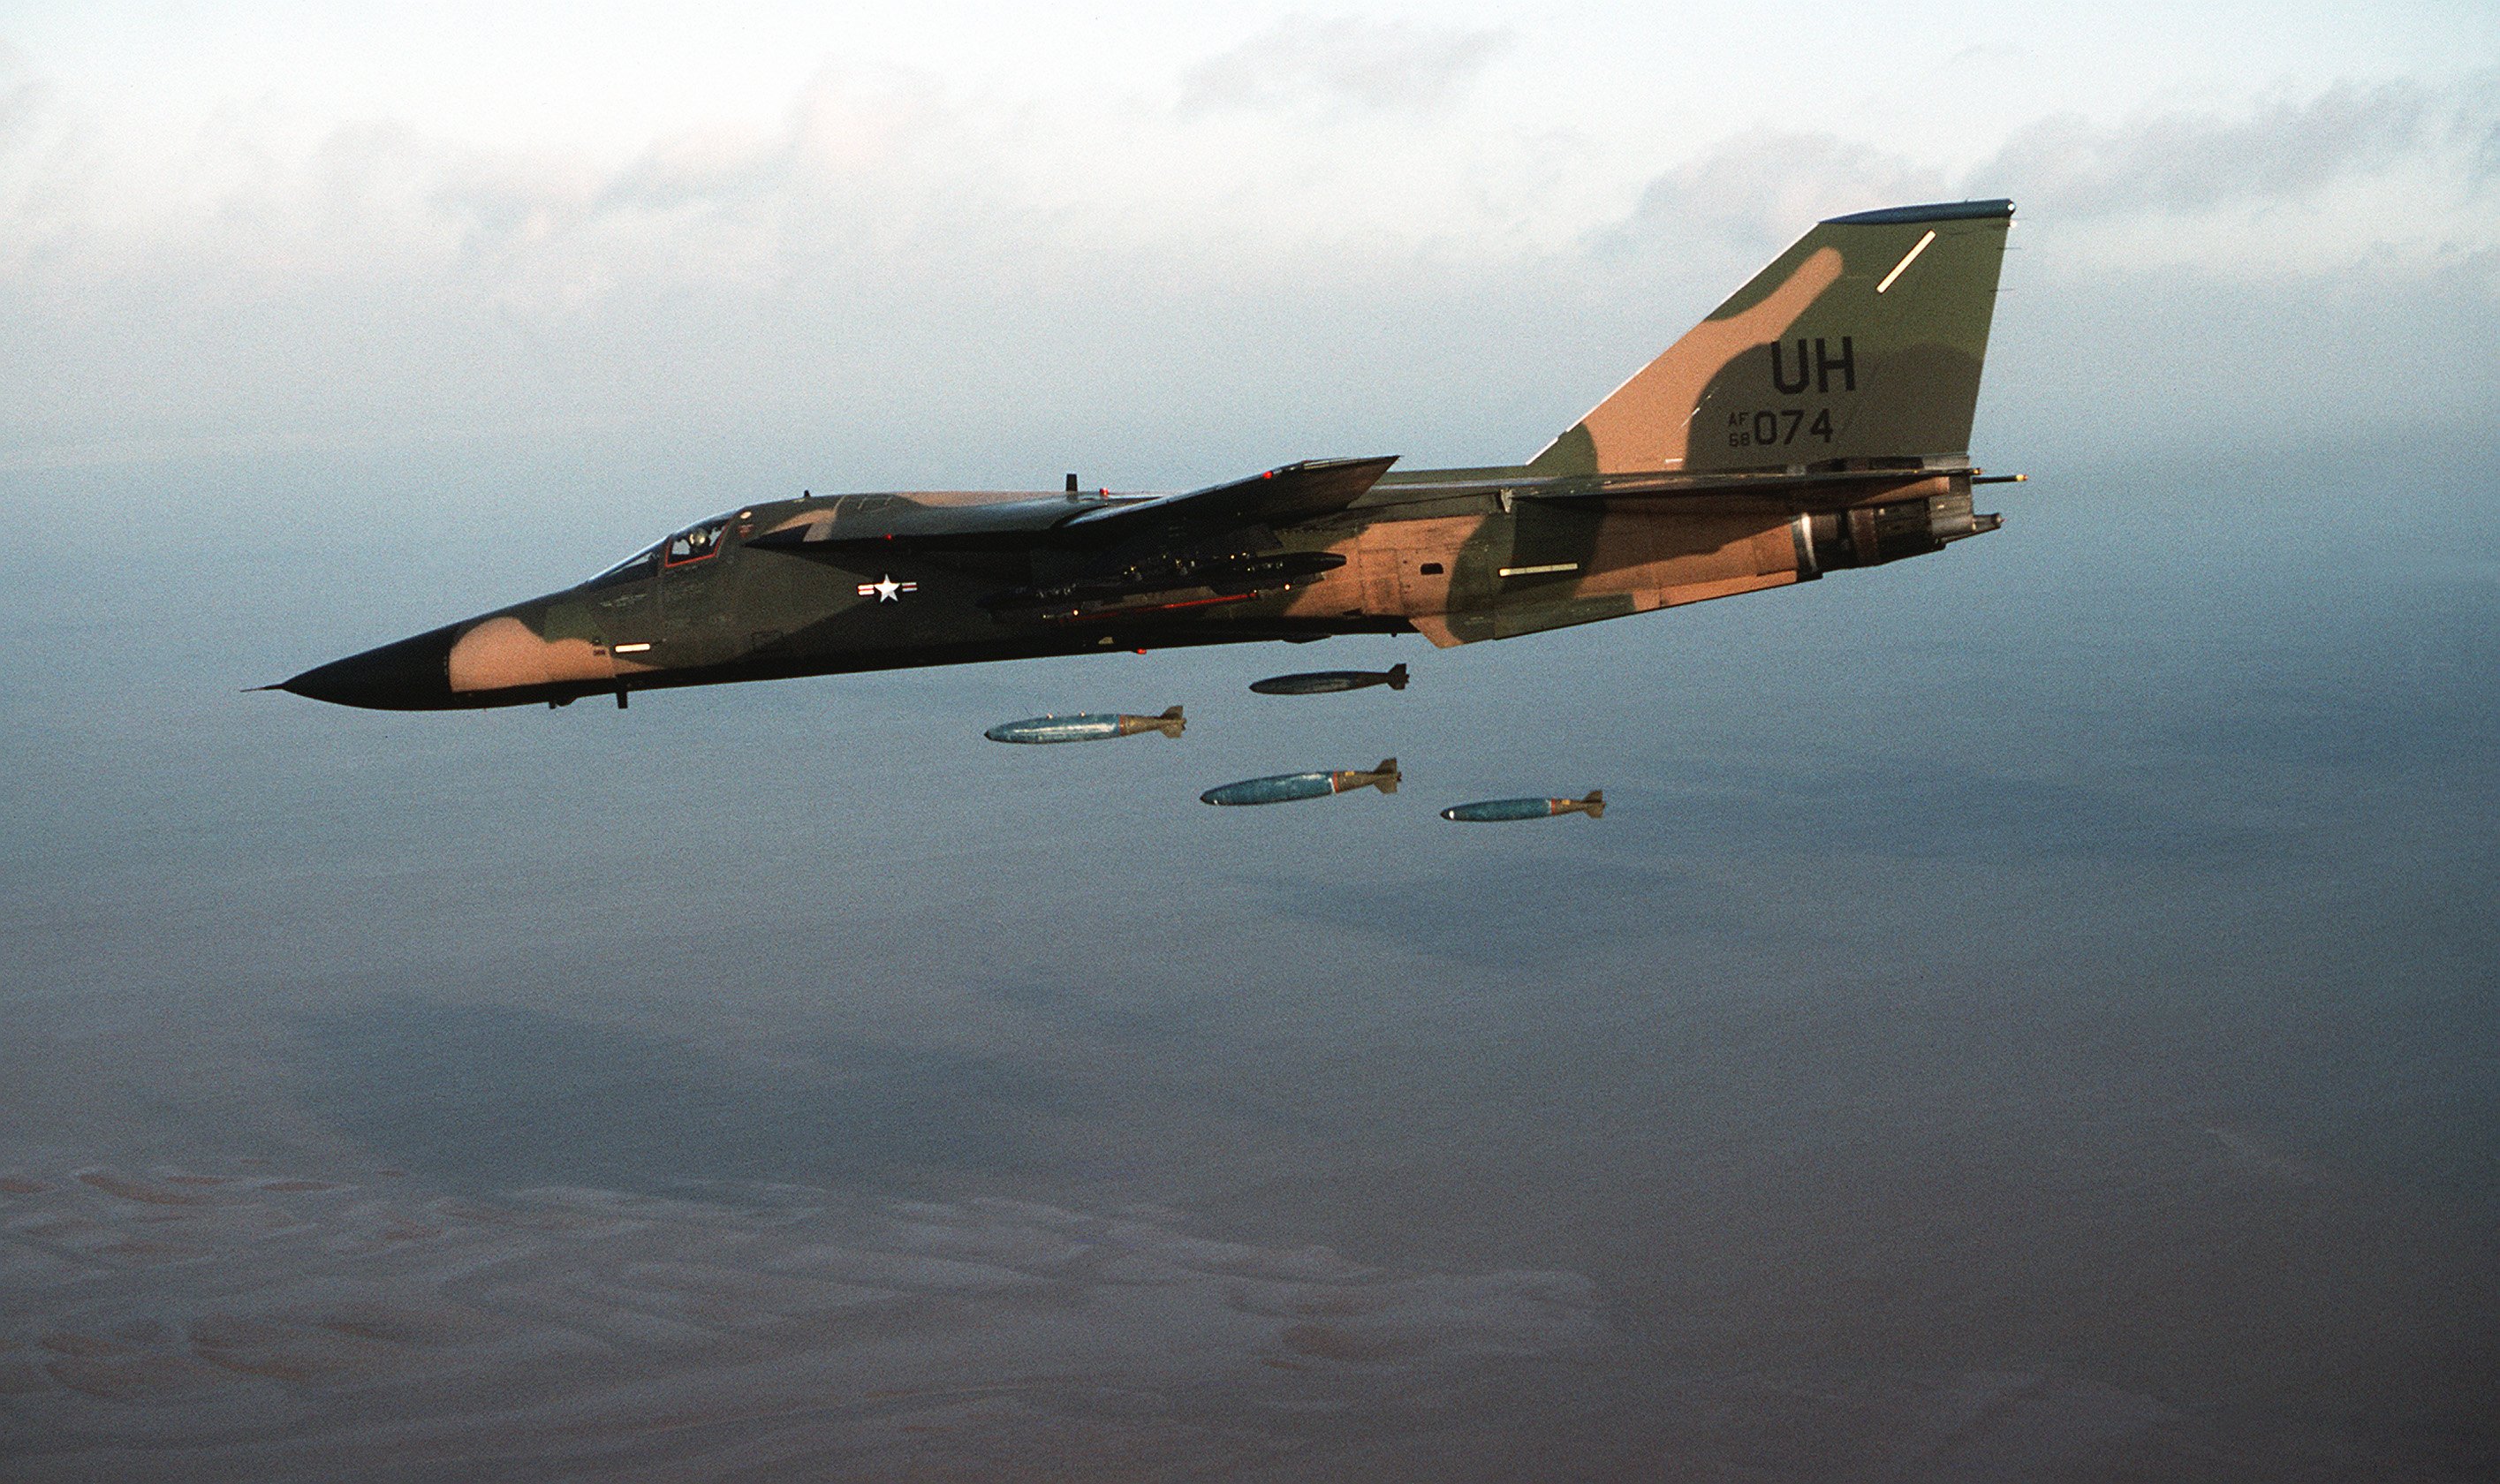 Amazing General Dynamics F-111 Aardvark Pictures & Backgrounds